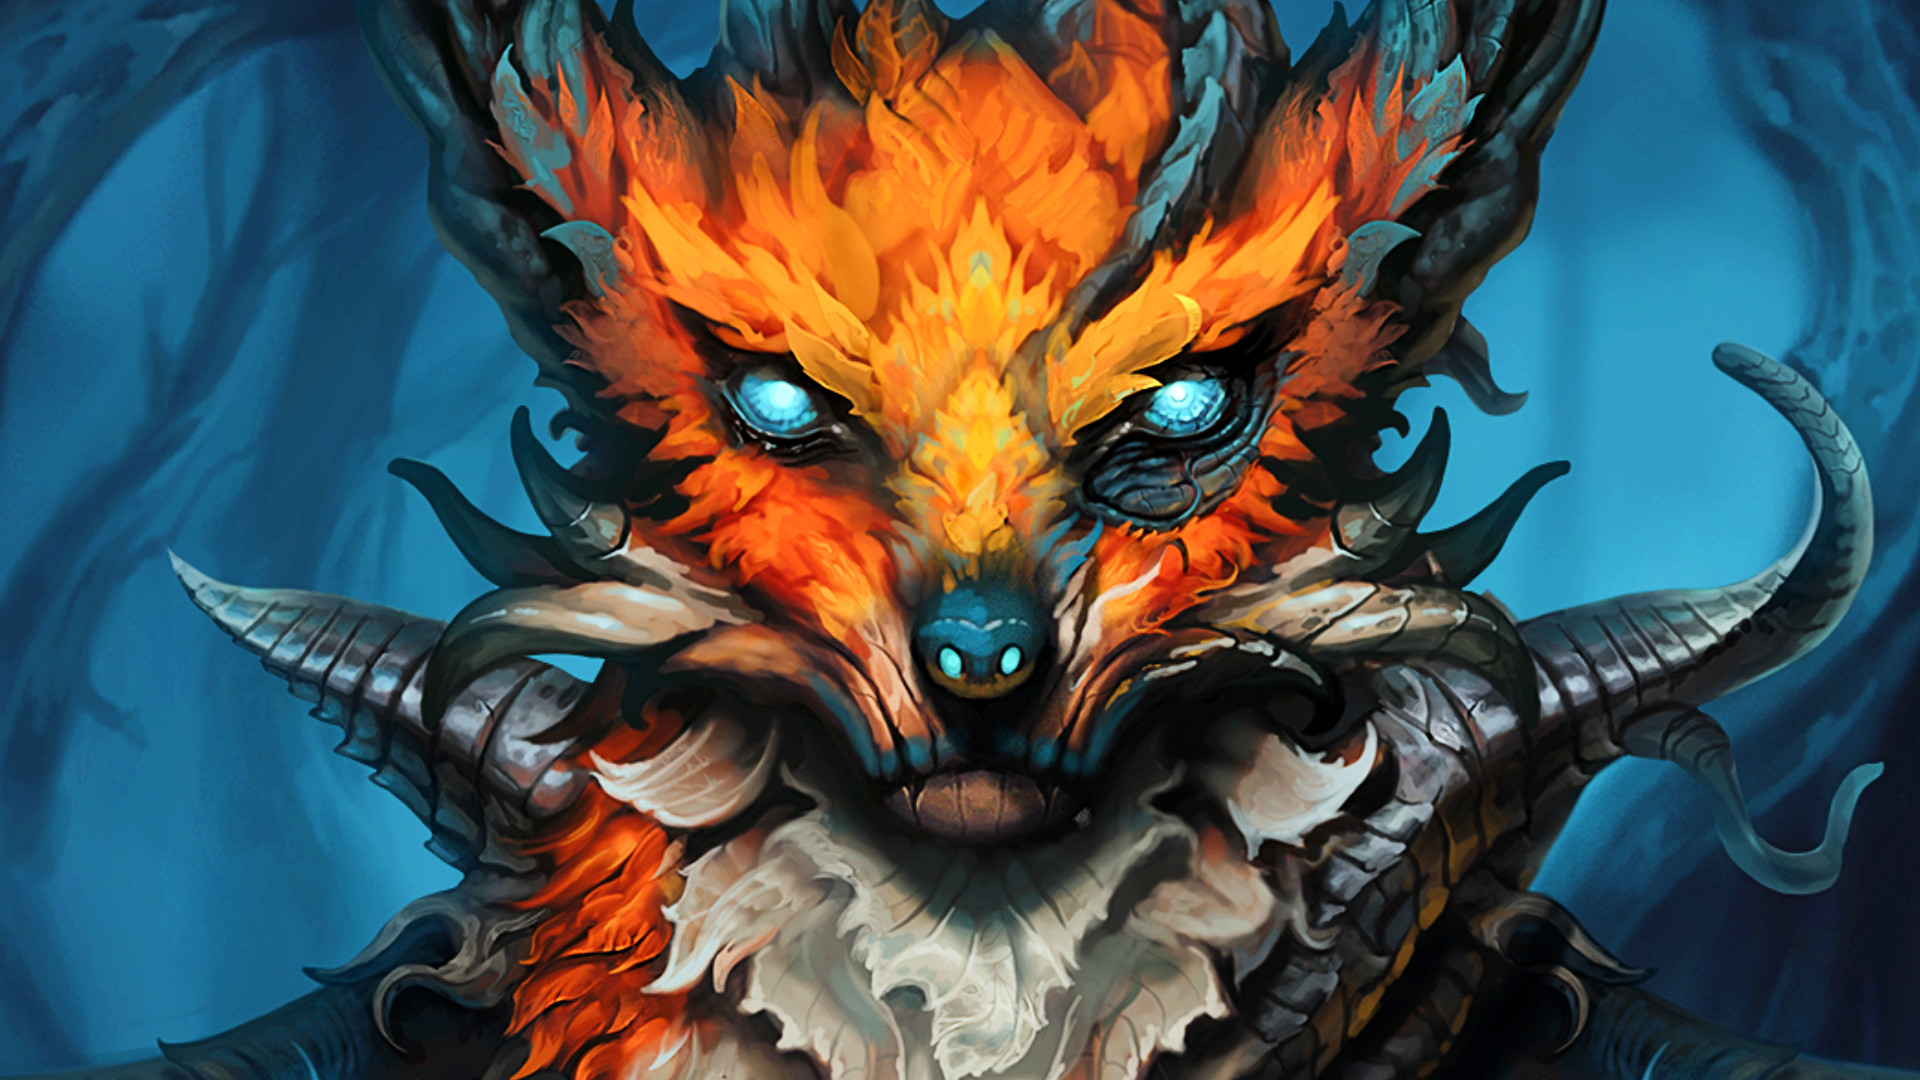 Superb strategy game Against the Storm on sale as playable Foxes join